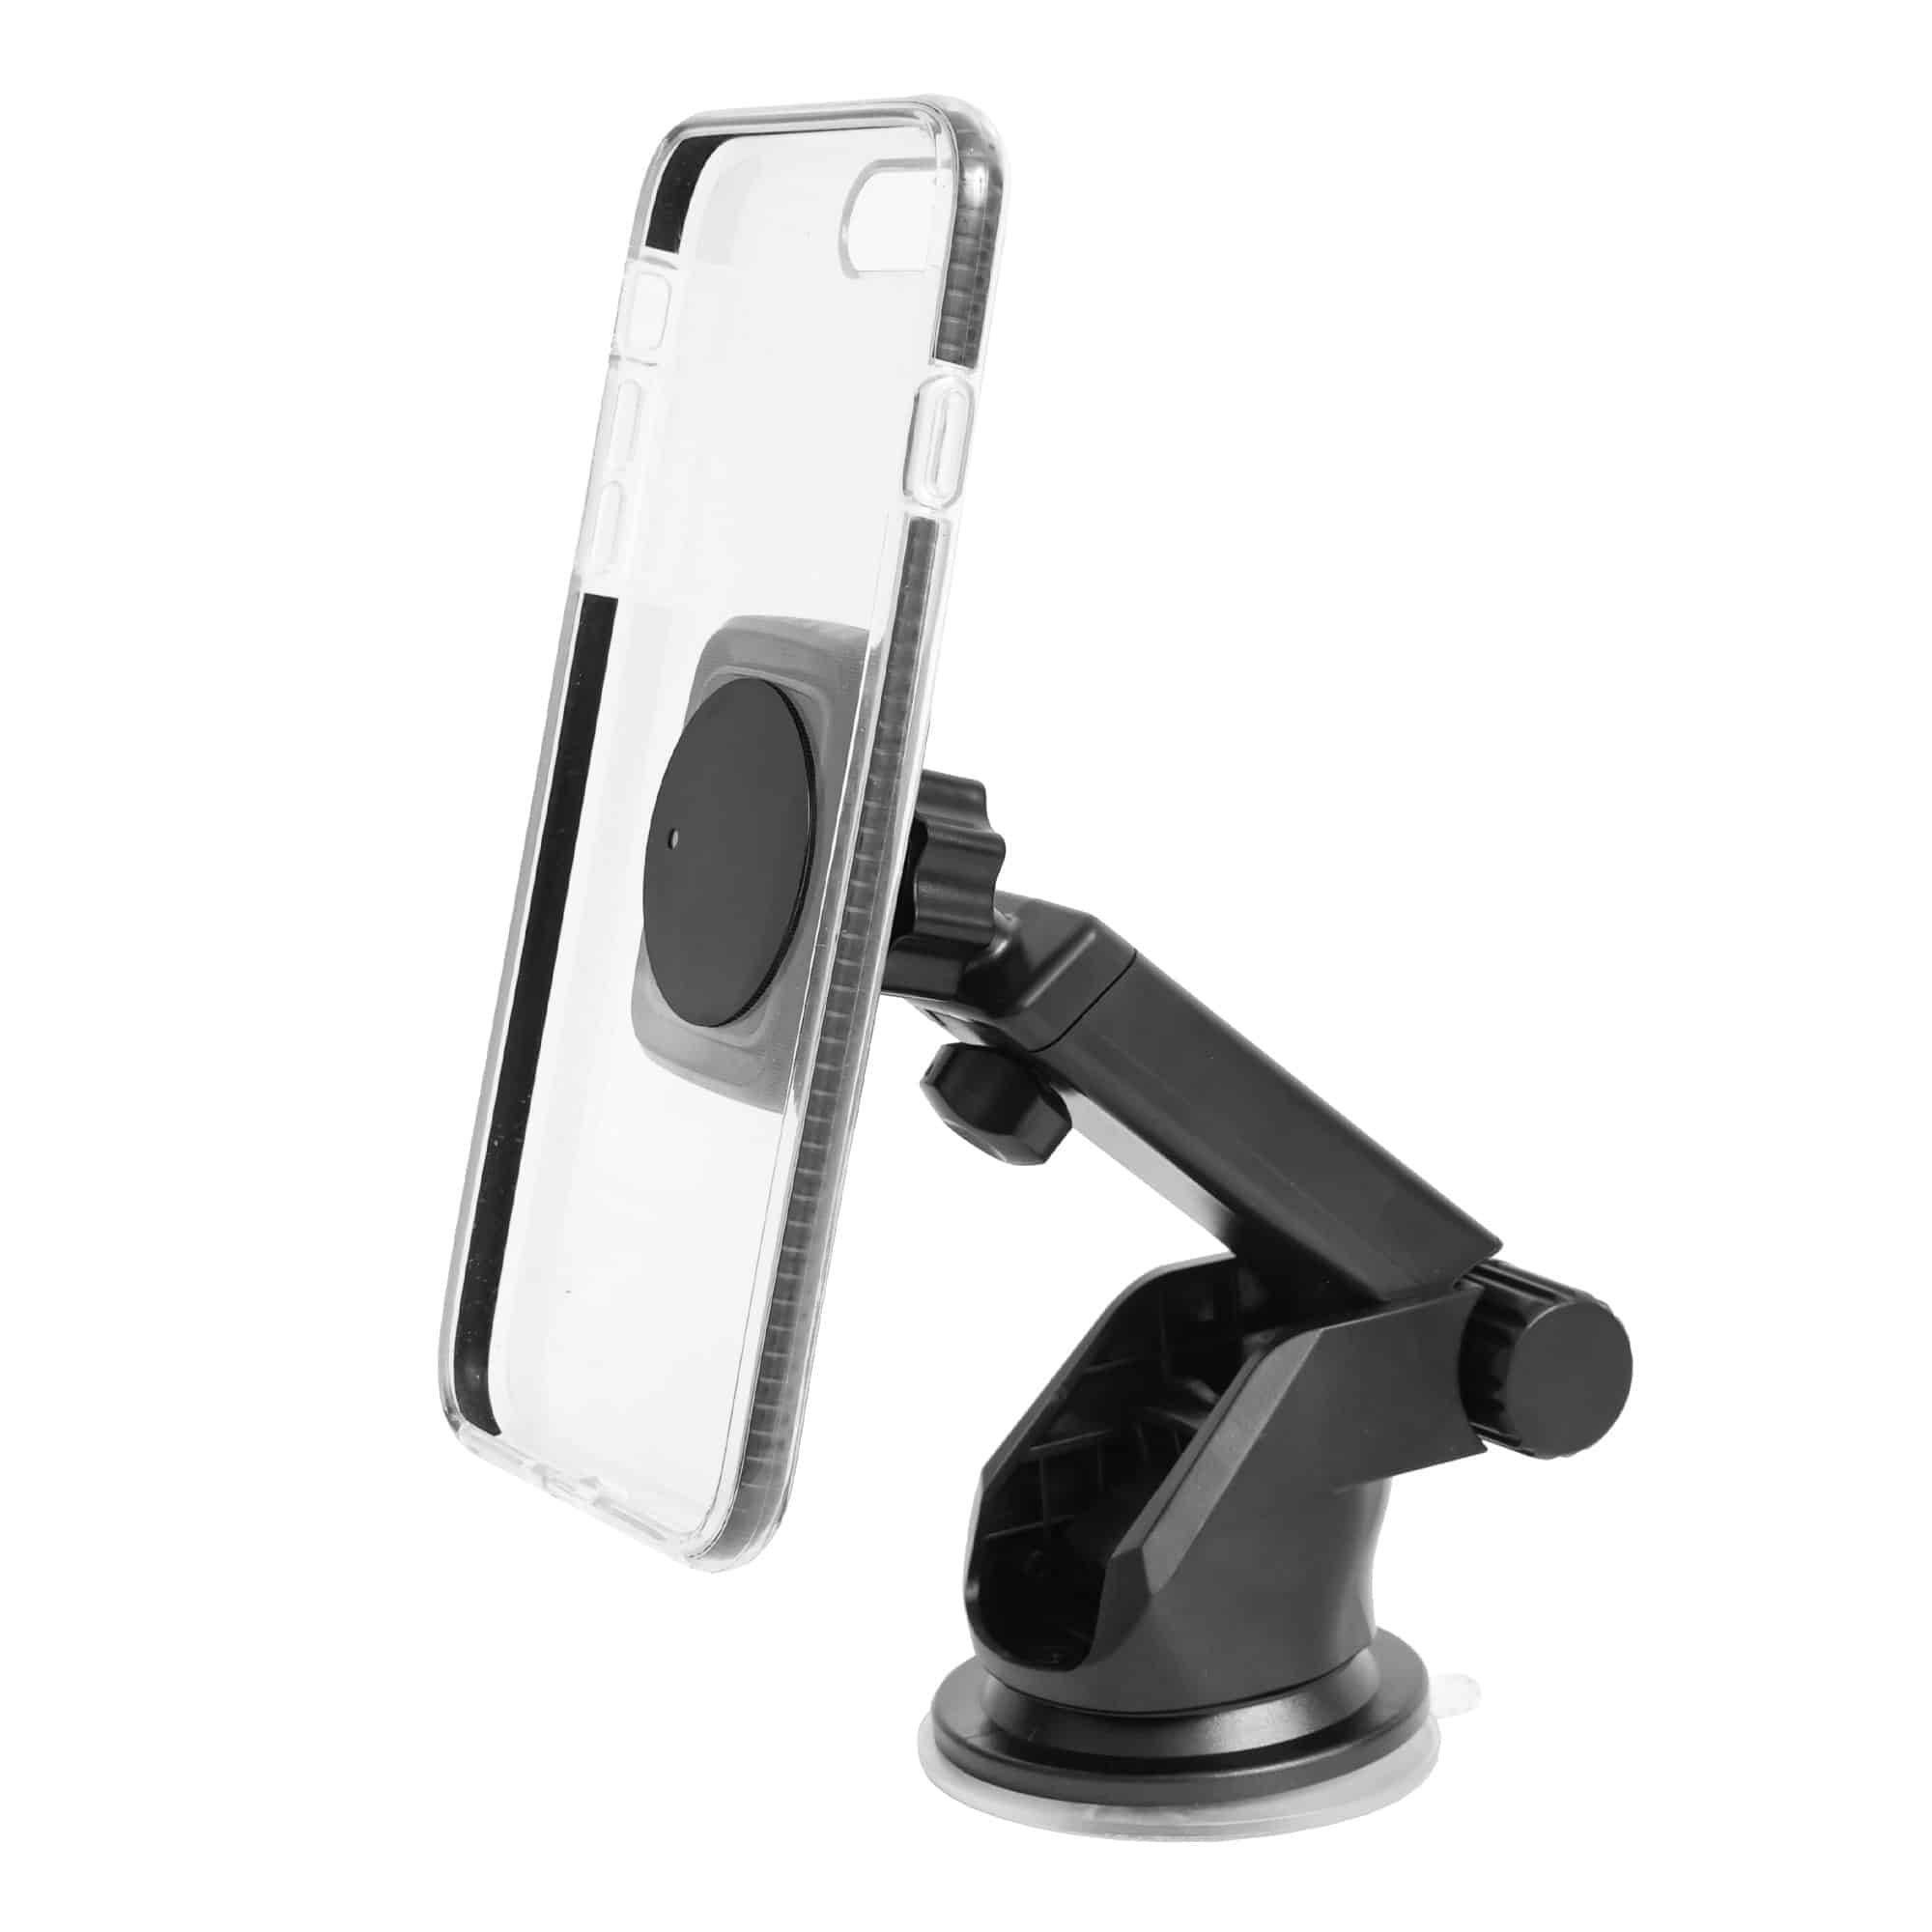 Premier Universal Cup Holder Cell Phone Mount with Flexible Arm